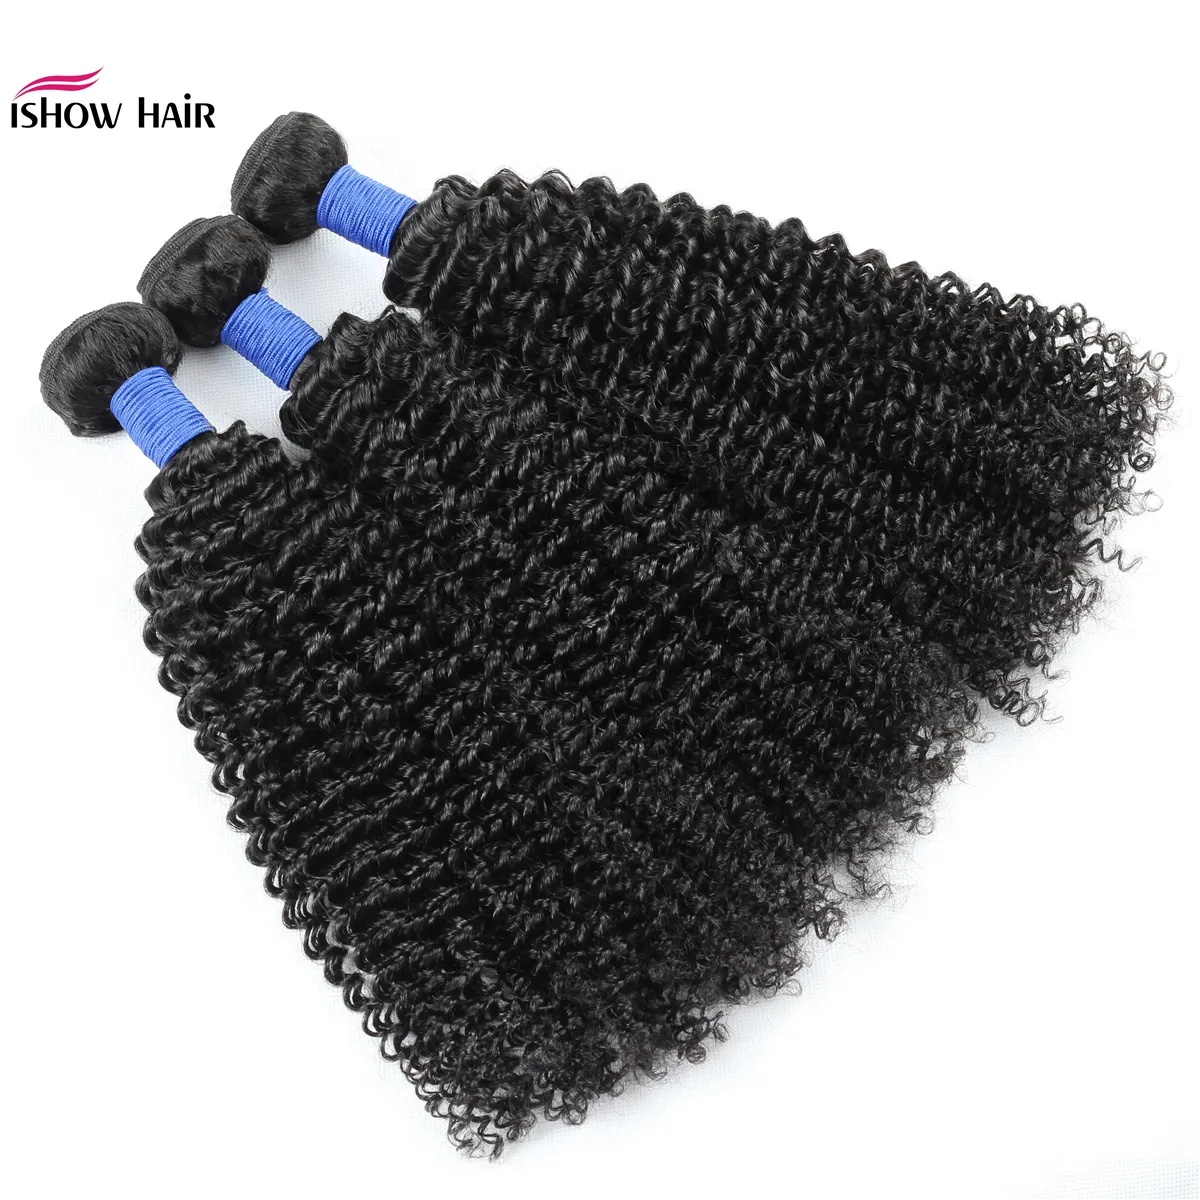 Ishow New 10A Peruvian Body Wave Remy Human Hair Bundles 3/4 PCS Deals Kinky Curly Loose Deep Indian Virgin Hair Weft Extensions Straight for Women Girls Natural Color